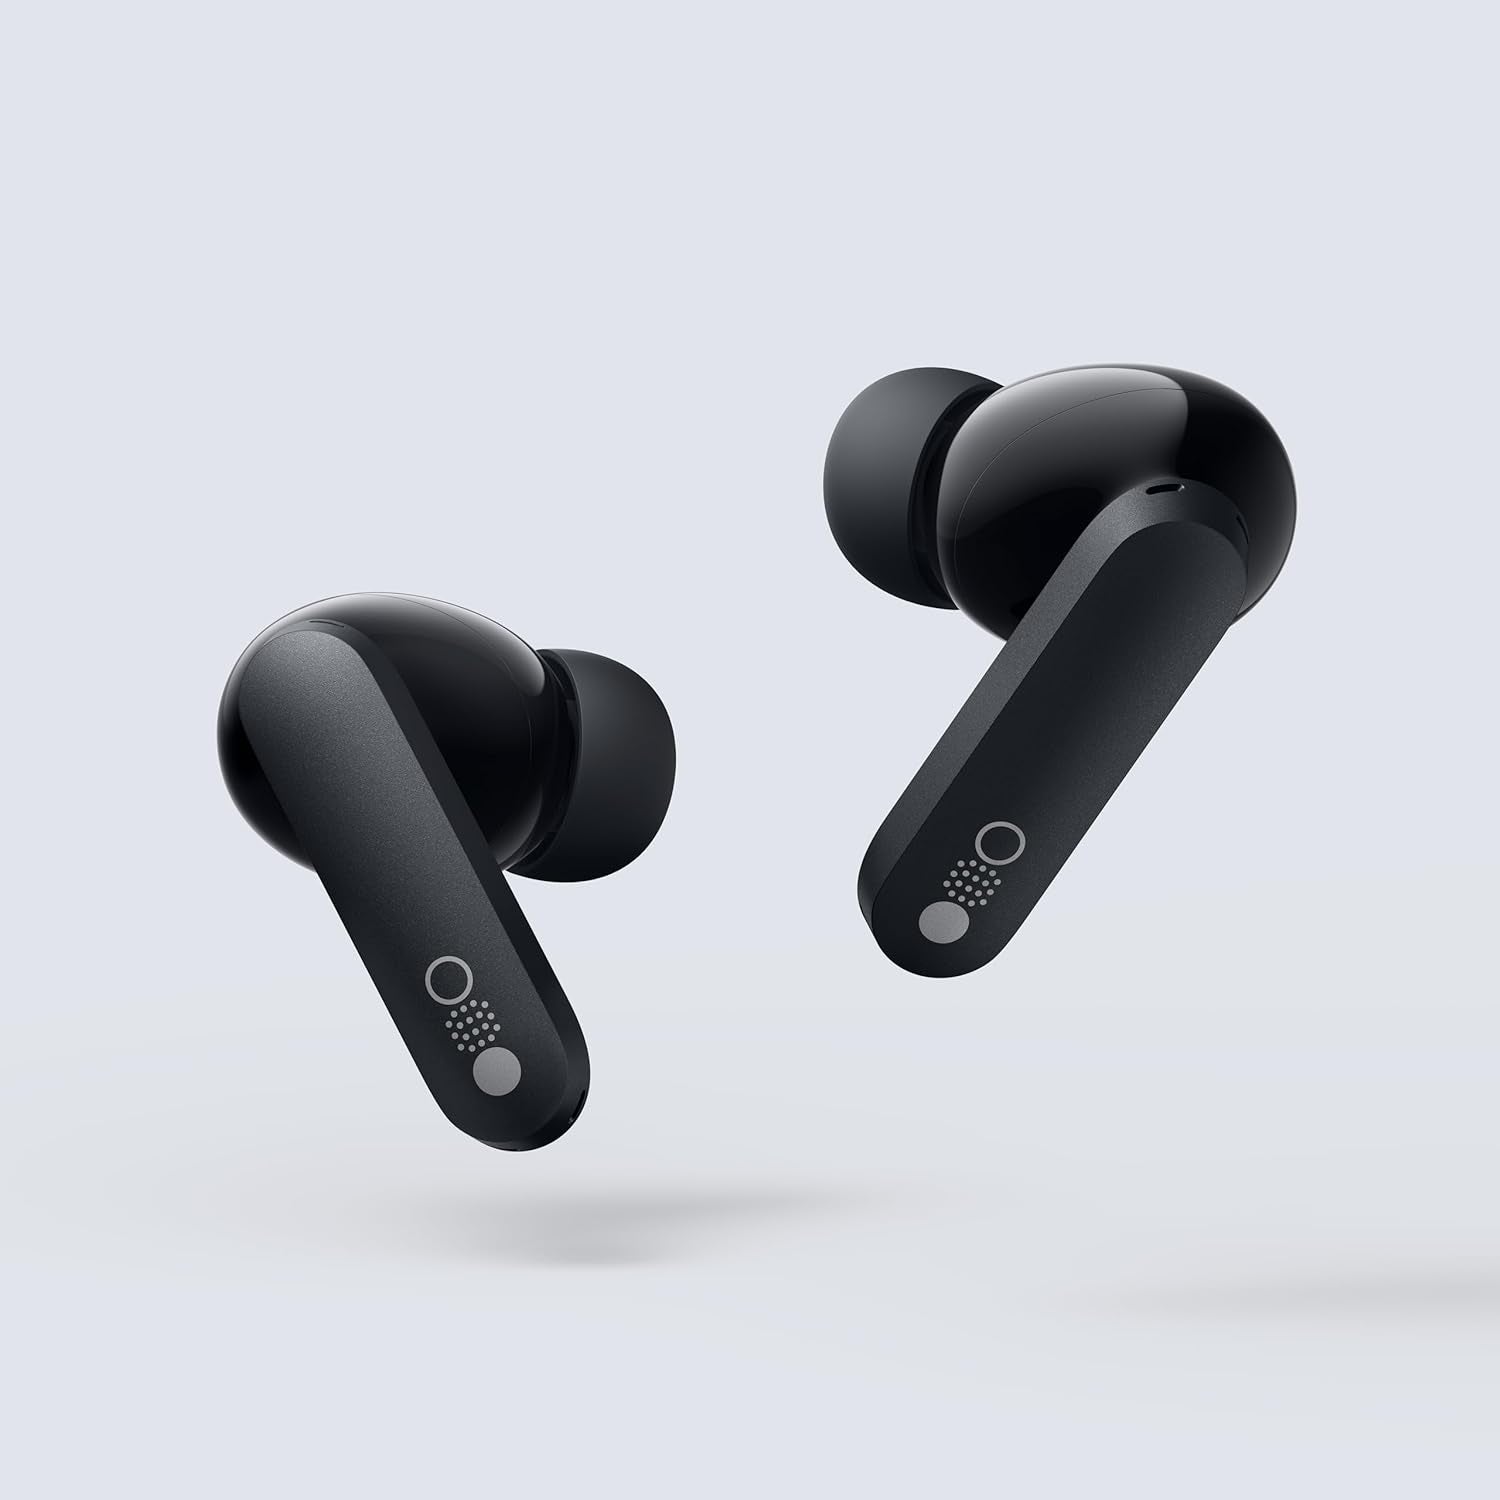 Buds Pro Wireless Earbuds,Active Noise Cancellation to 45 Db,39H Playtime IP54 Waterproof Dynamic Bass Earphones,Bluetooth 5.3 in Headphones for Iphone & Android (Dark Grey)